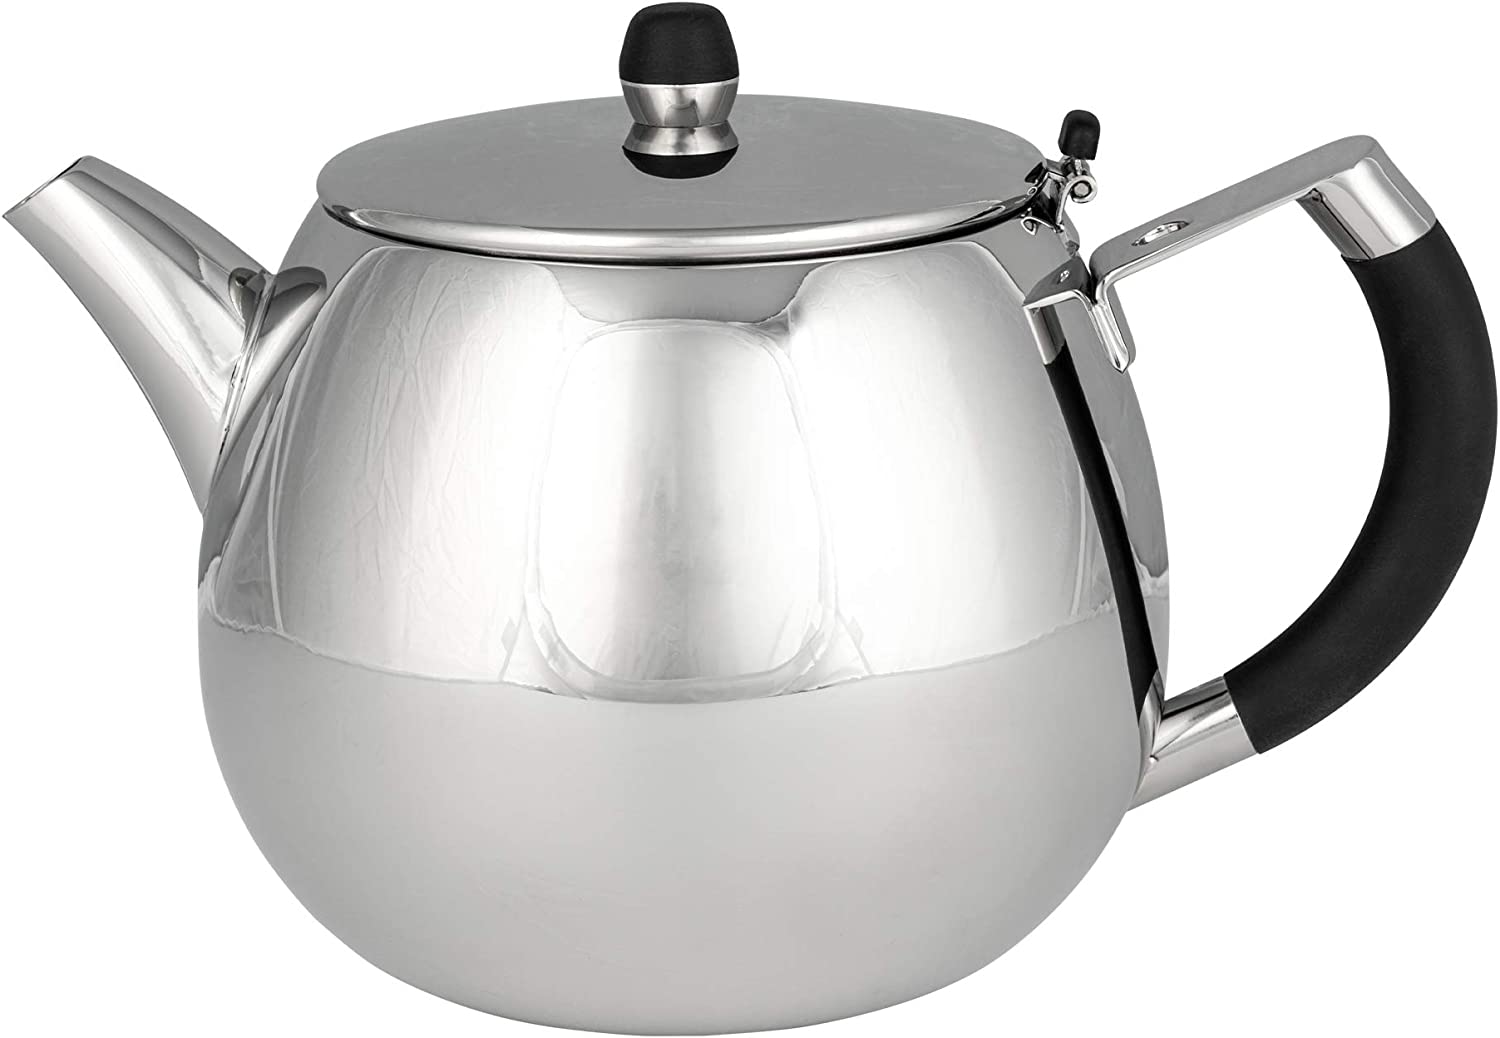 Cafe Stal Grunwerg Café Stål Grandeur Double-Walled Teapot with Strainer 18/10 Stainless Steel